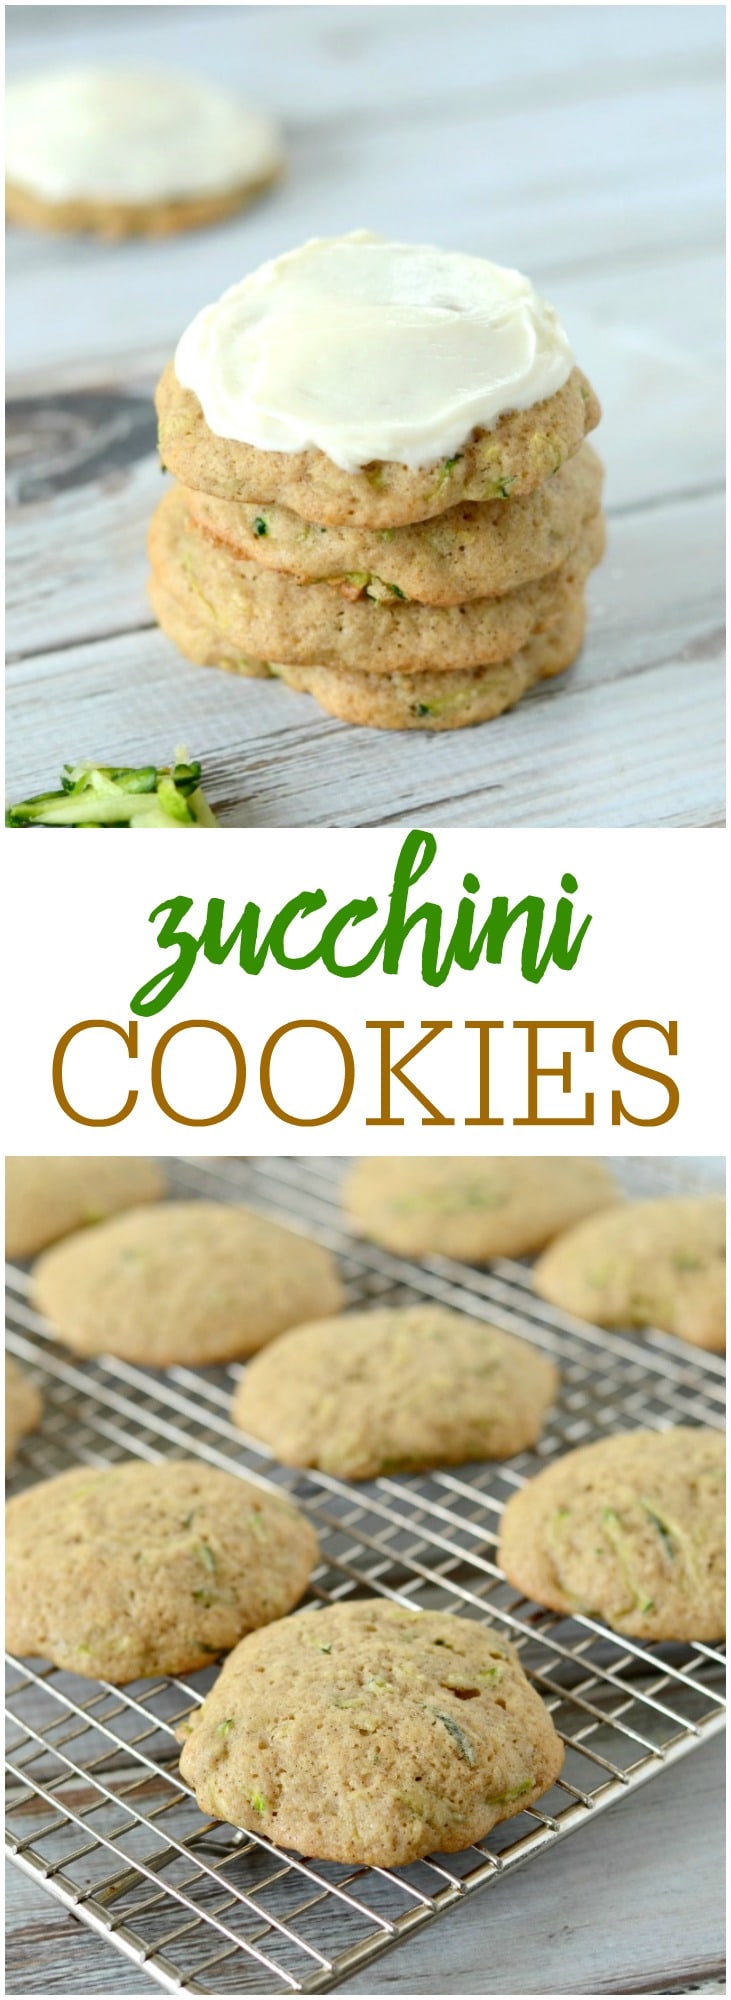 Zucchini Cookies with Cream Cheese Frosting - soft, fluffy, and delicious. These cookies are filled with zucchini and are topped with an amazing frosting!